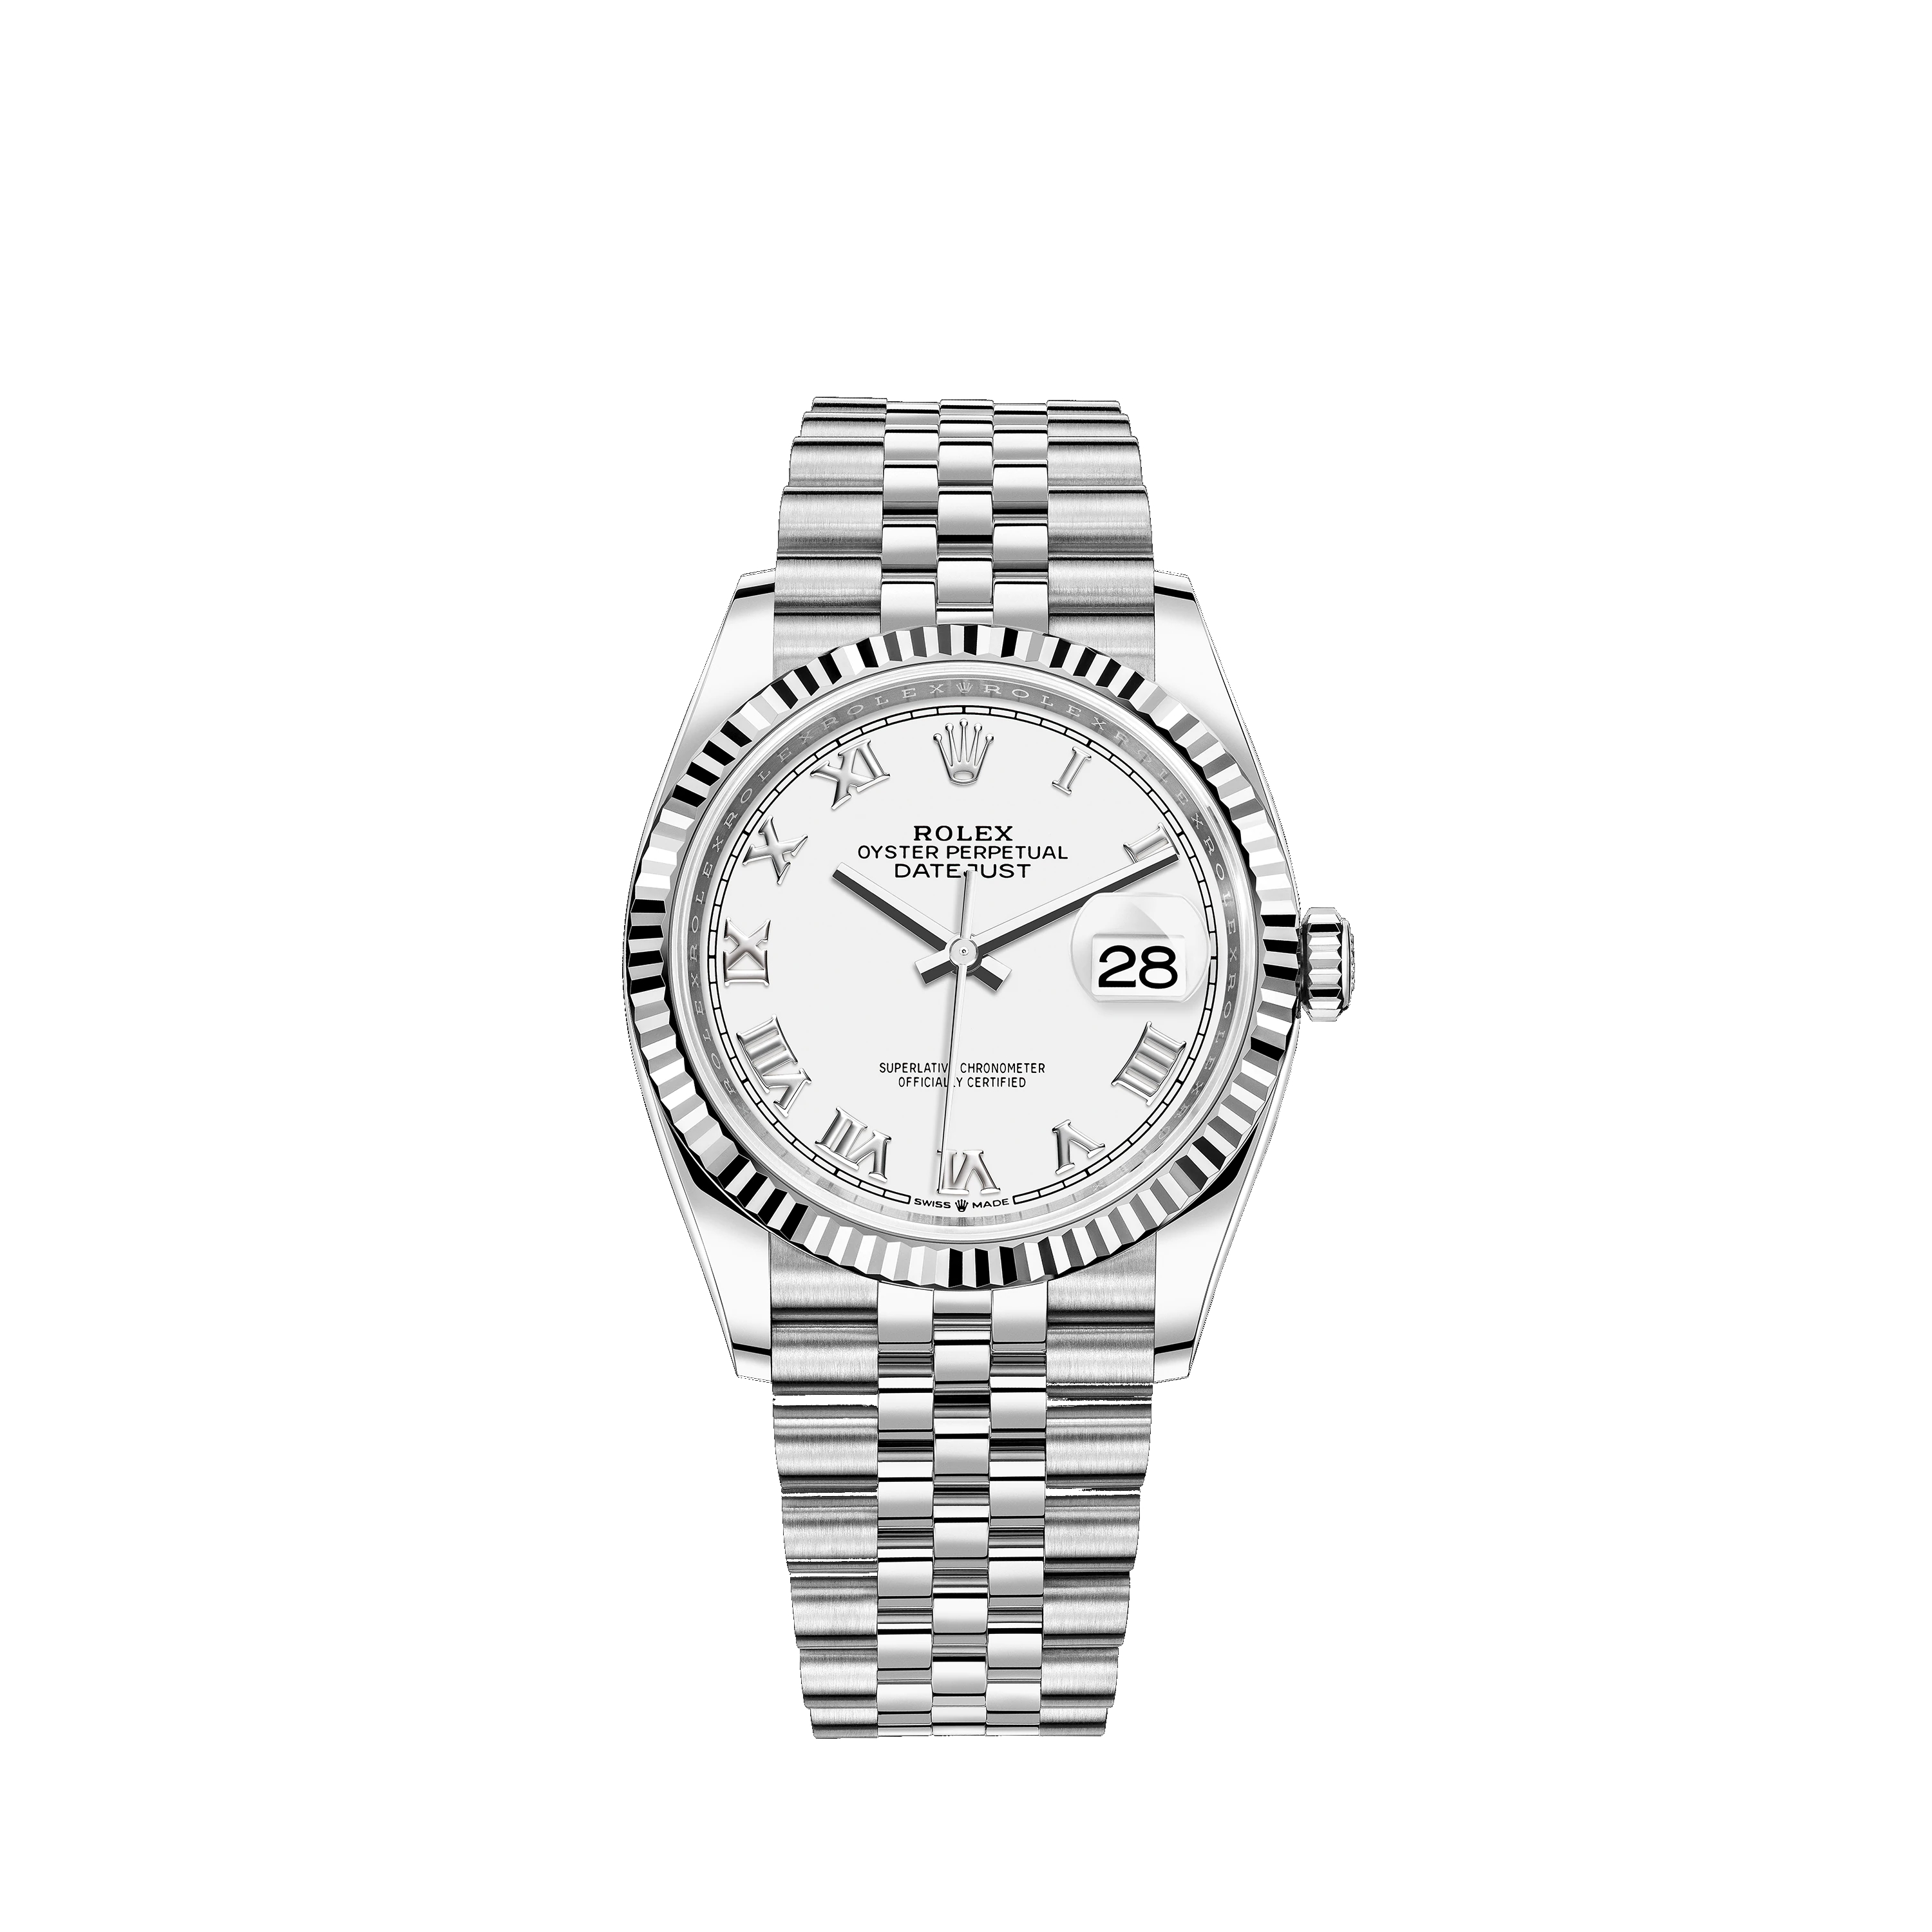 Datejust 36 126234 White Gold & Stainless Steel Watch (White)